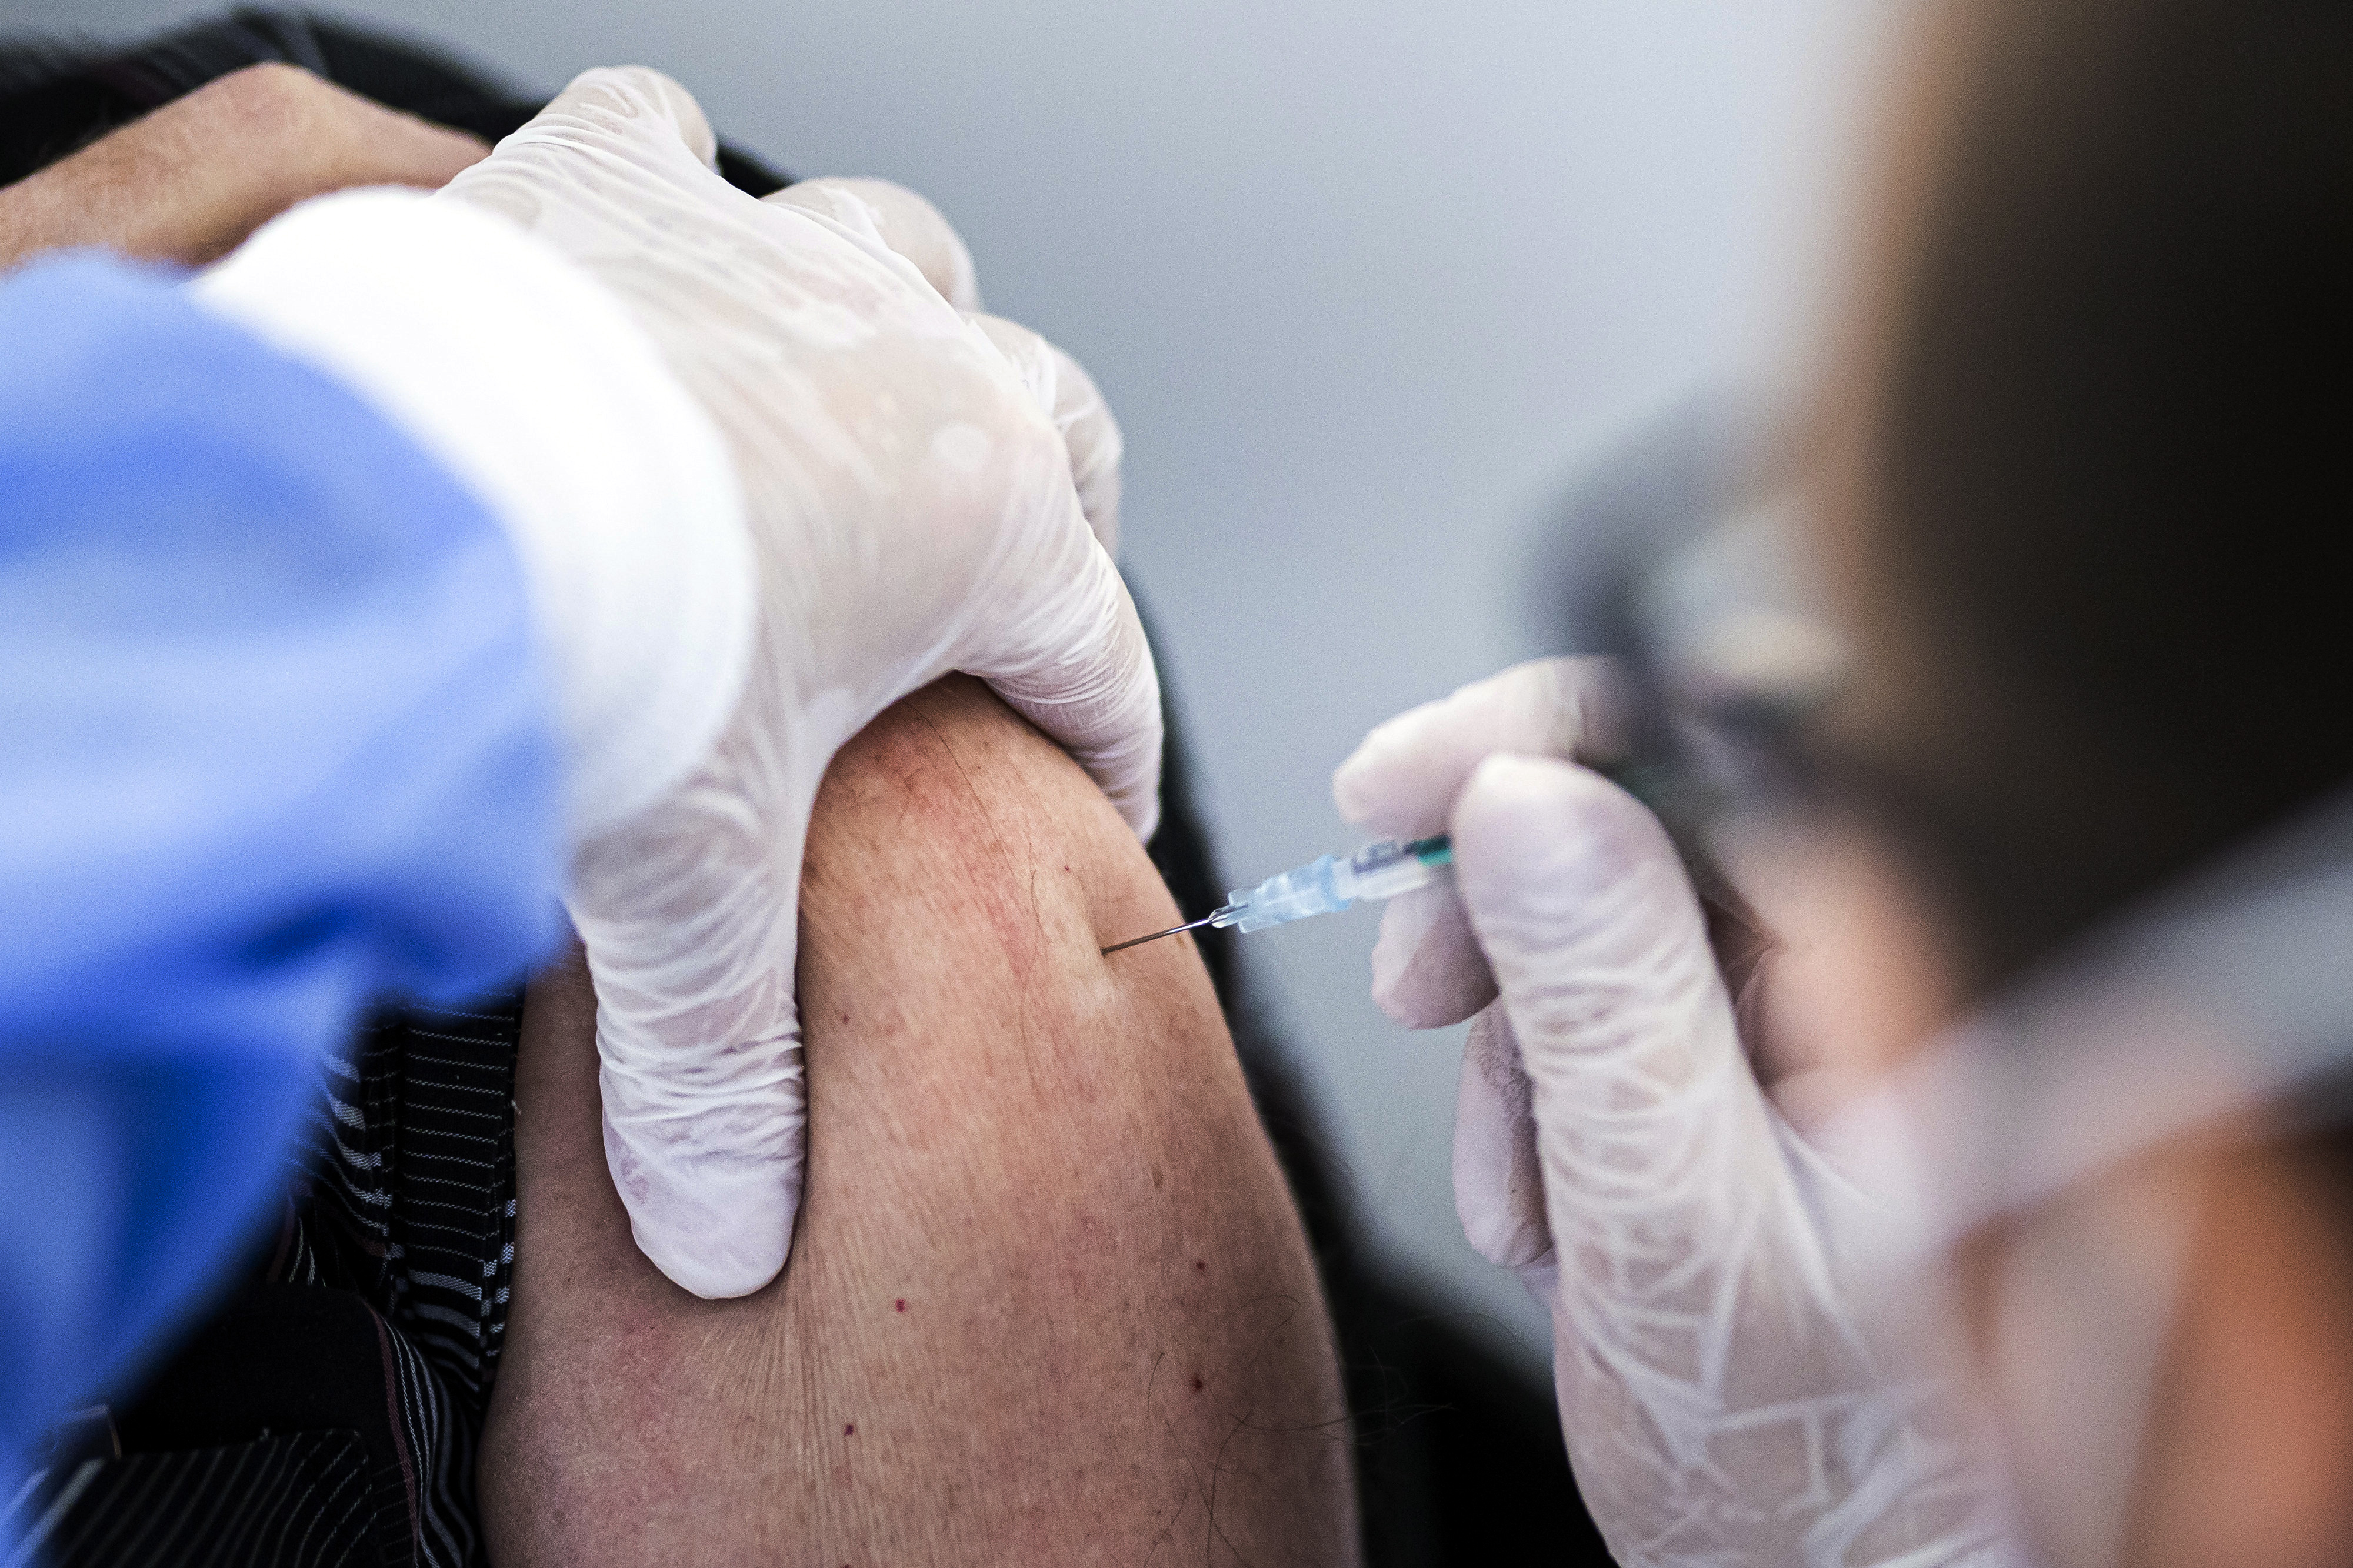 Vaccination against Covid-19: Close-up of the injection of the vaccine into the upper arm of a woman.